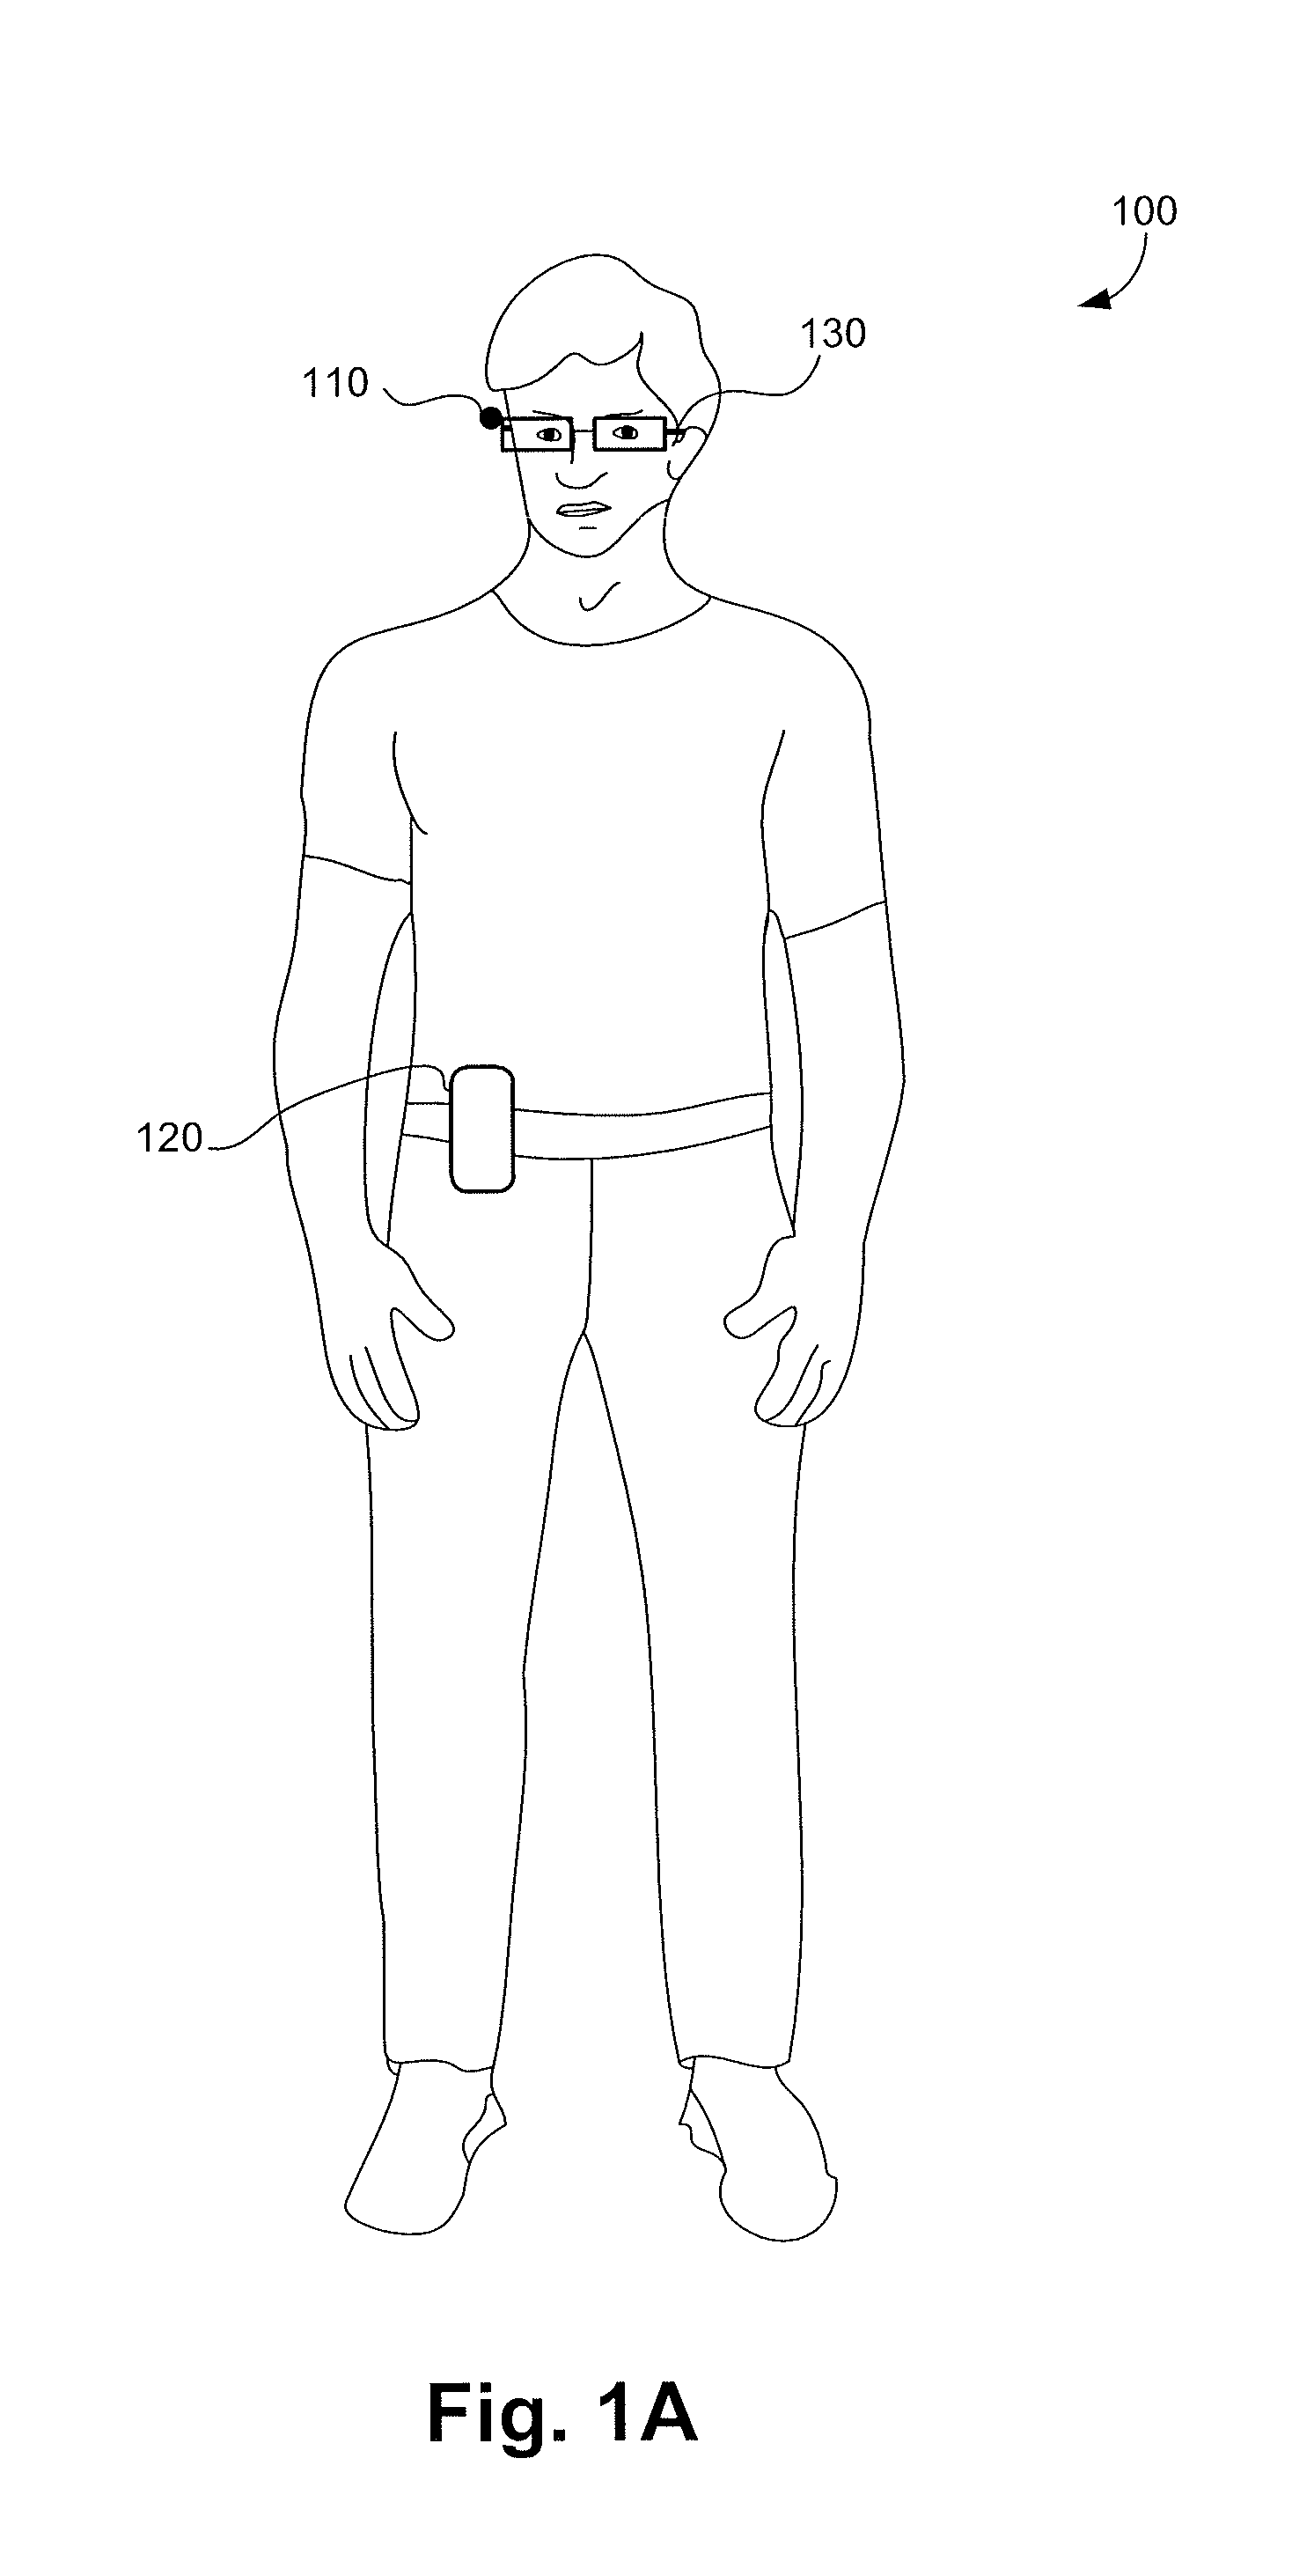 Wearable apparatus and method for selectively categorizing information derived from images